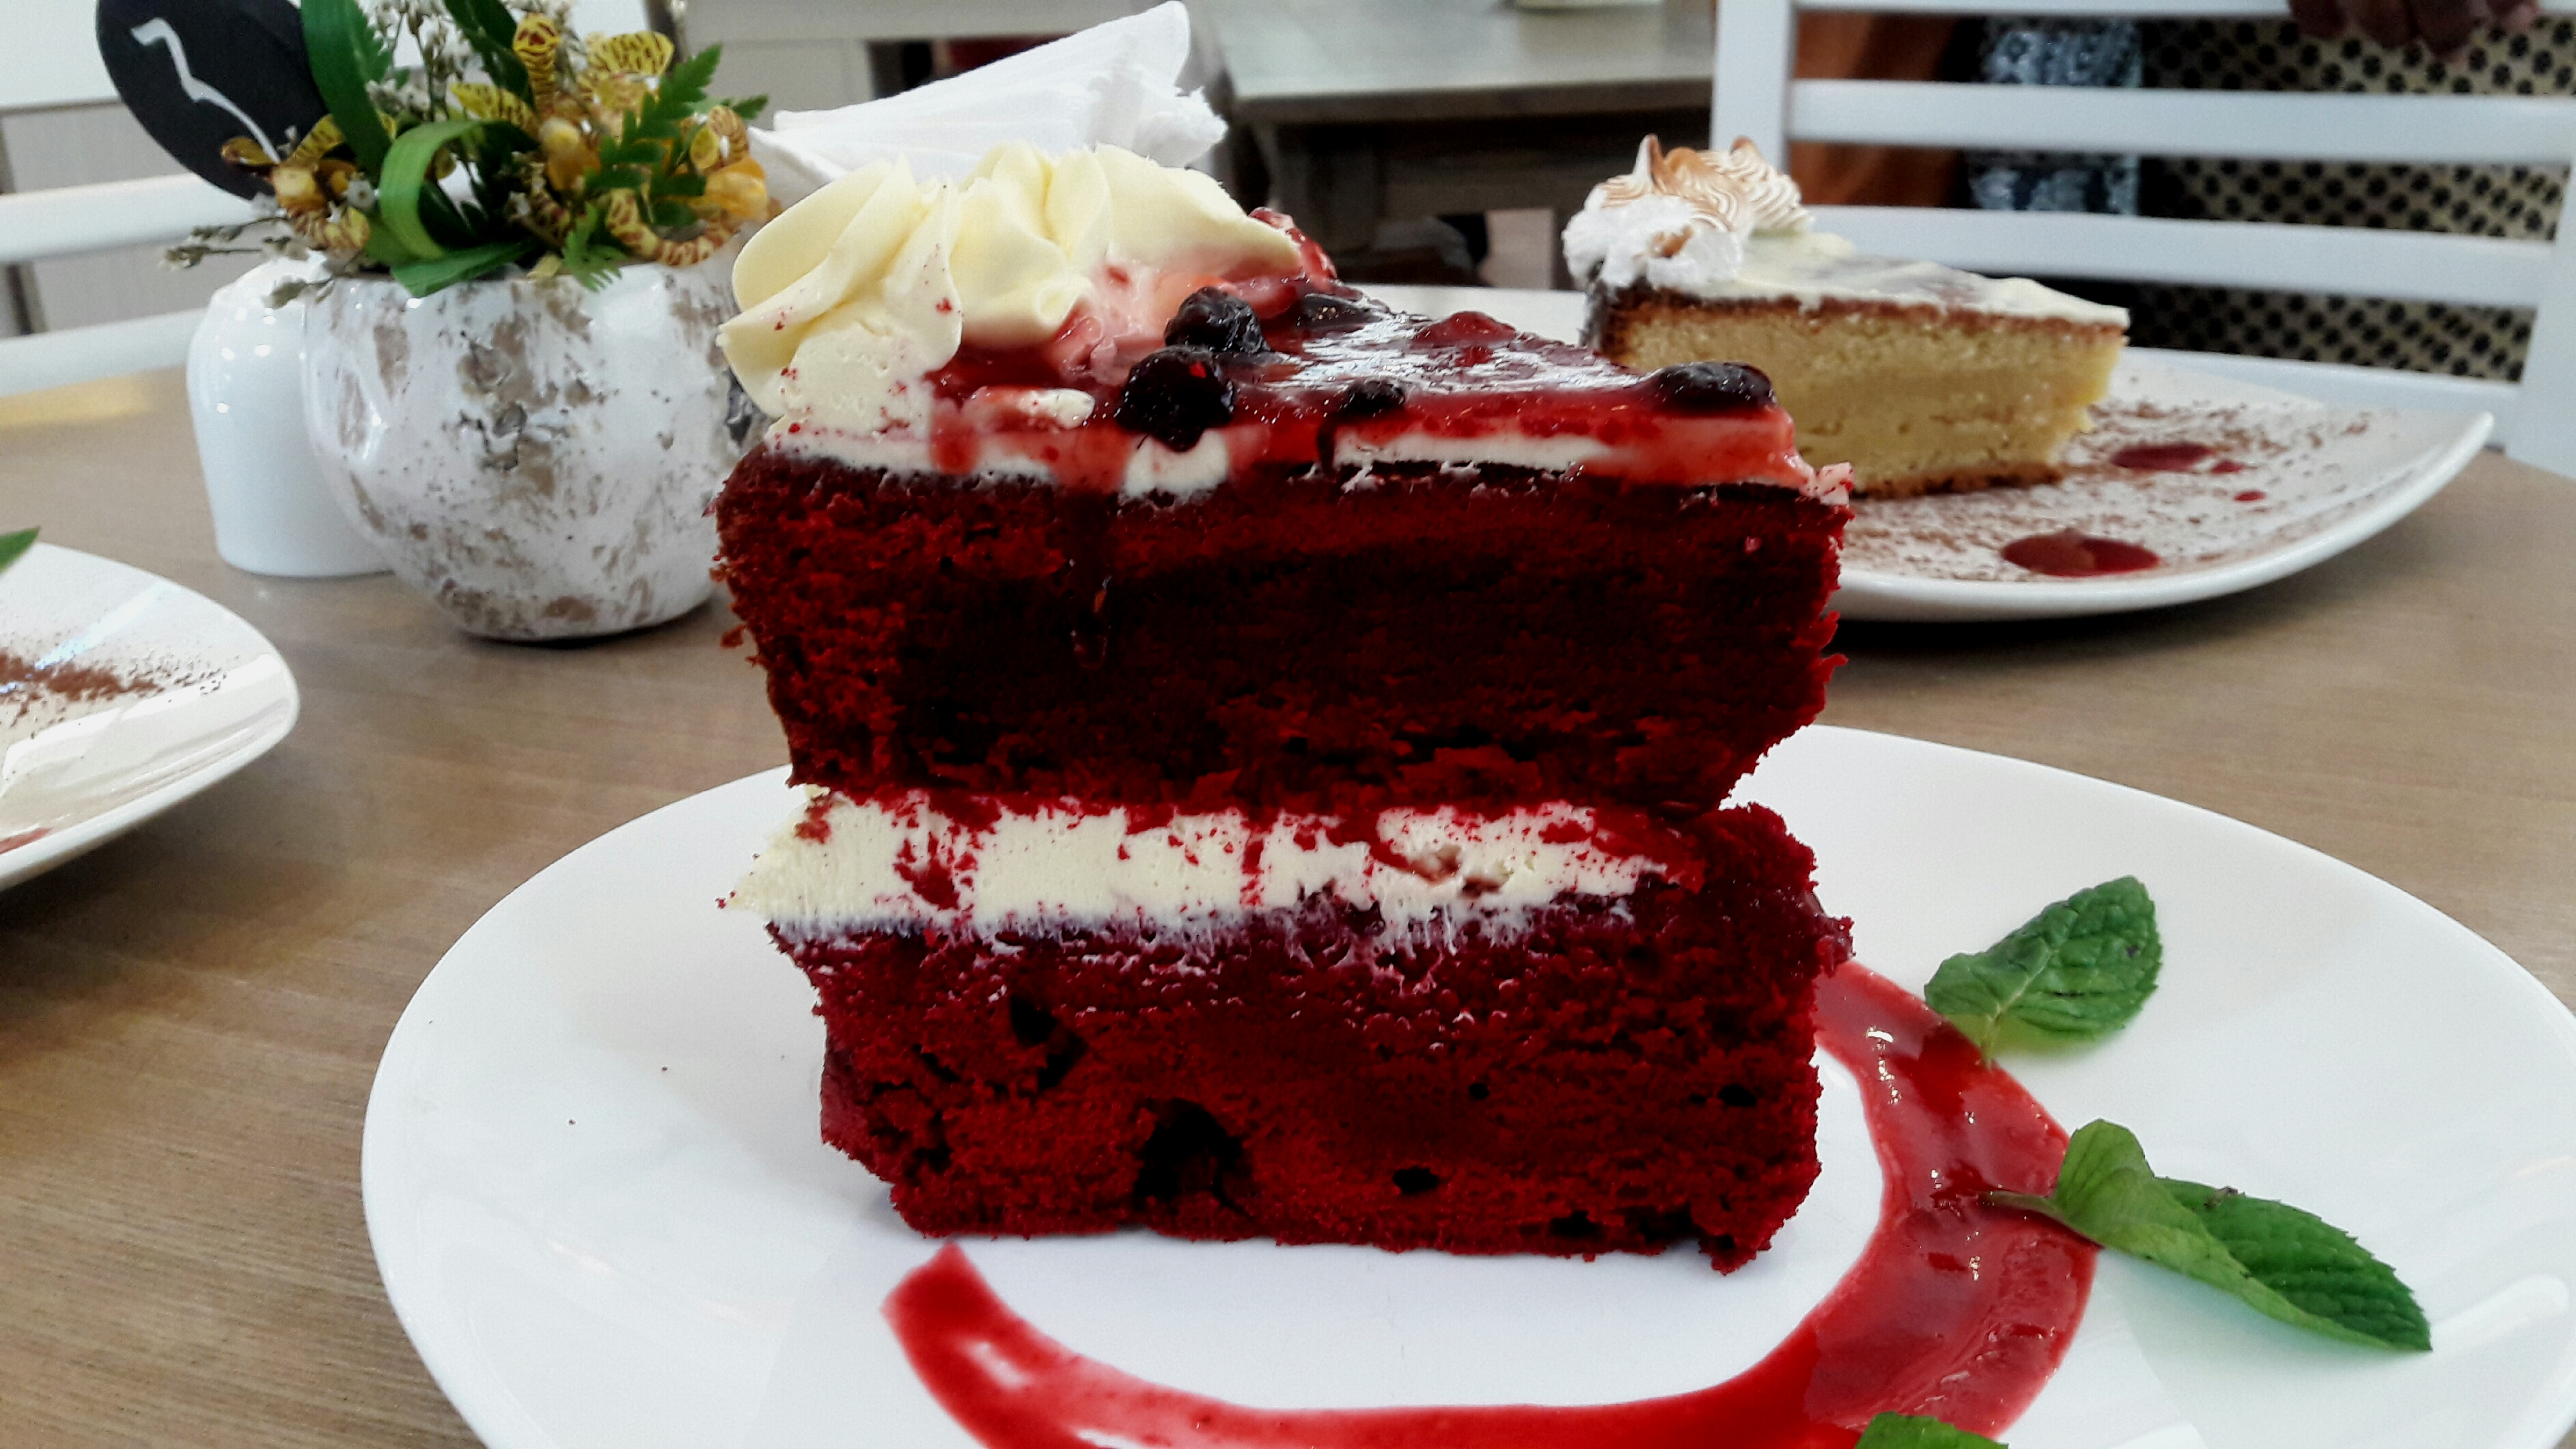 Chelsea's Cup N Cake - Cafe in Curepipe, Mauritius